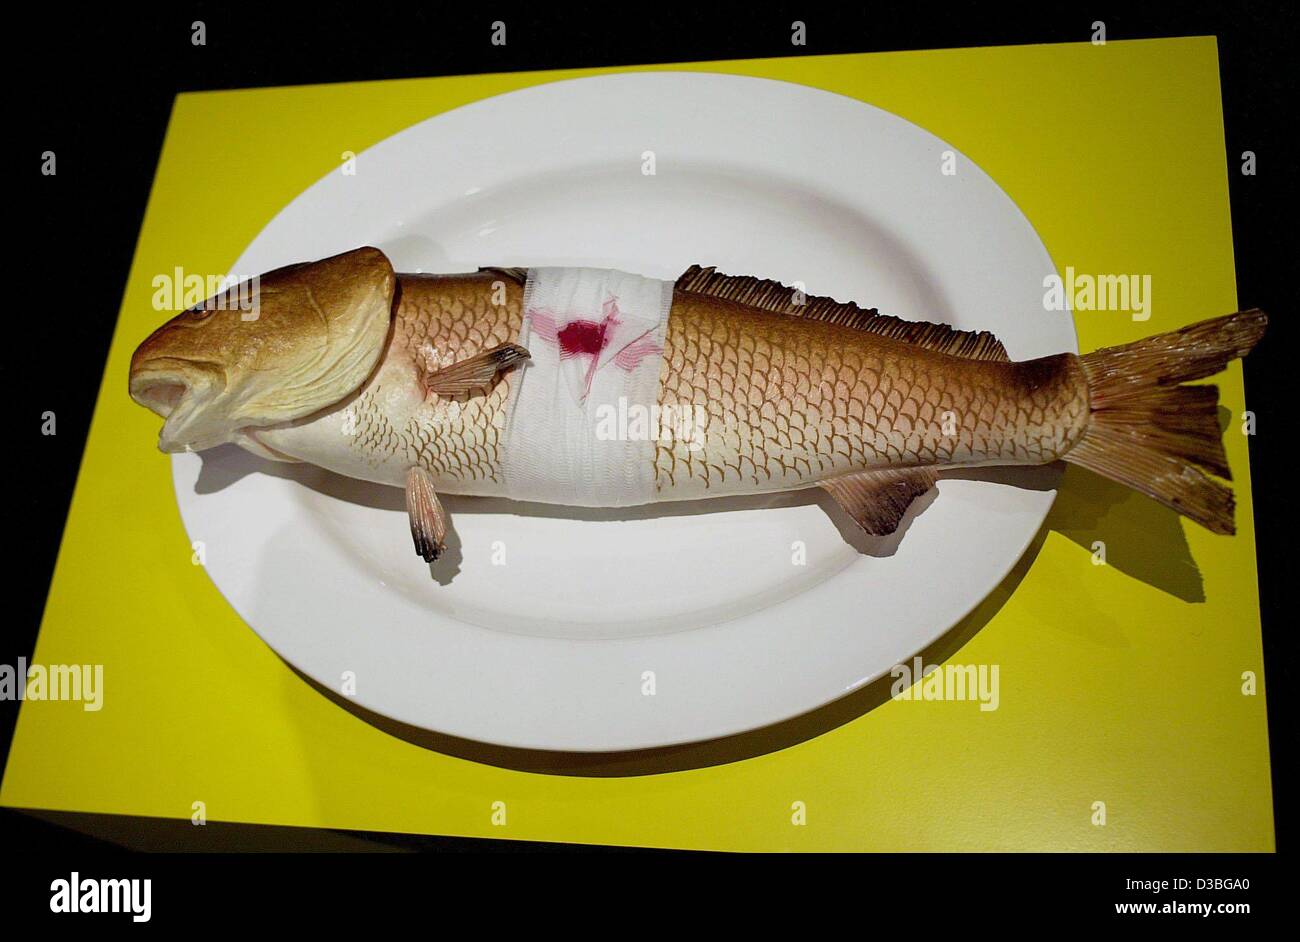 (dpa) - An injured fish with a bandage lying on a plate is a part of the installation 'Kinderzimmer' (children's room) by Hans-Peter Feldmann in the exhibition 'Das lebendige Museum' (the living museum) at the Museum for Modern Art in Frankfurt, 15 May 2003. Stock Photo